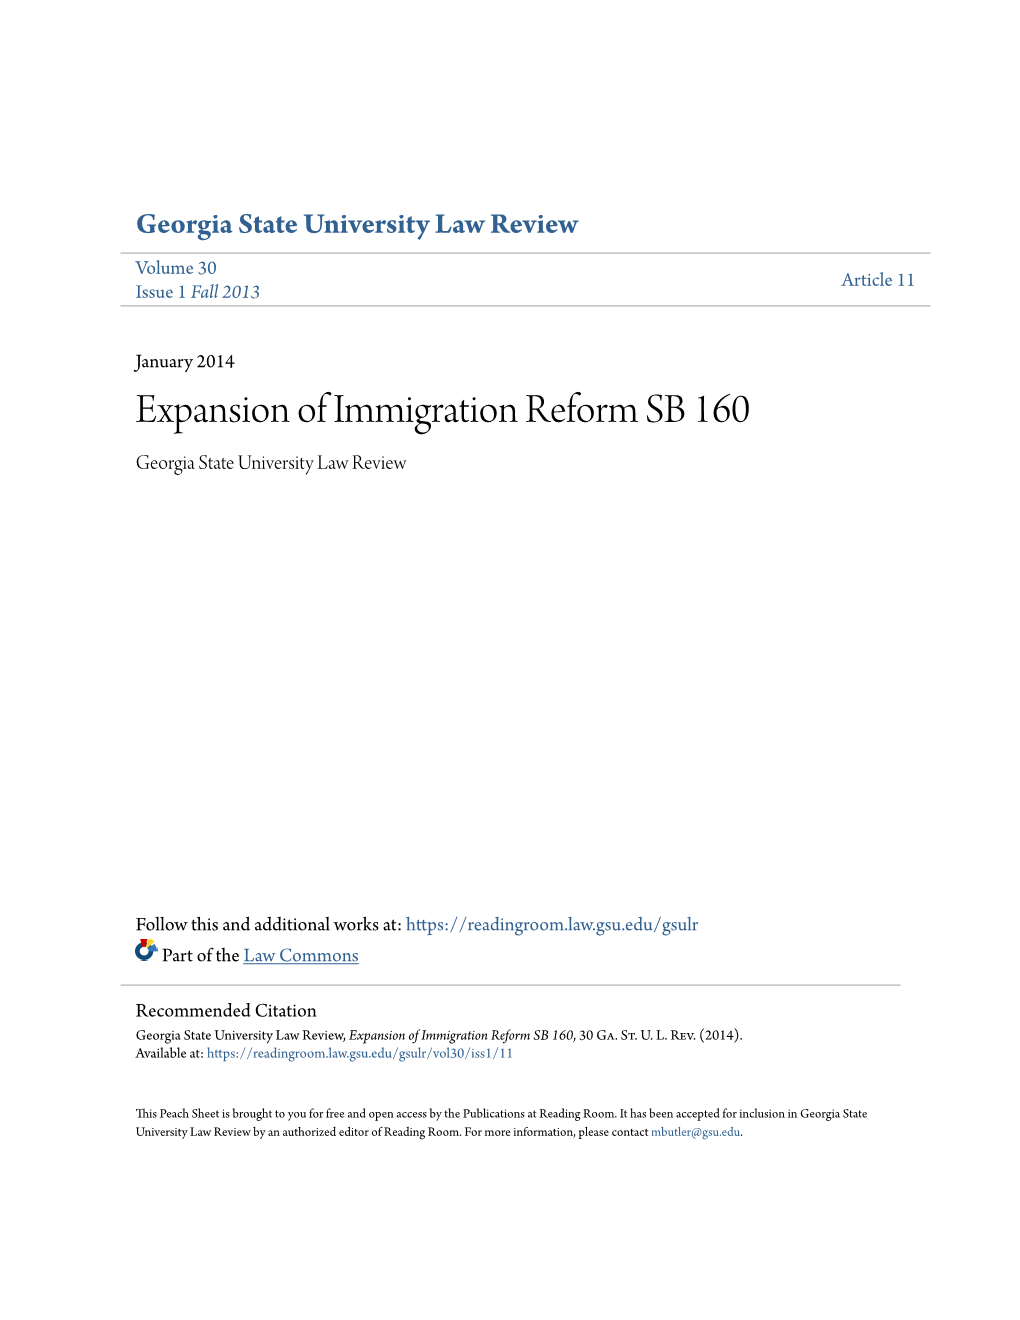 Expansion of Immigration Reform SB 160 Georgia State University Law Review